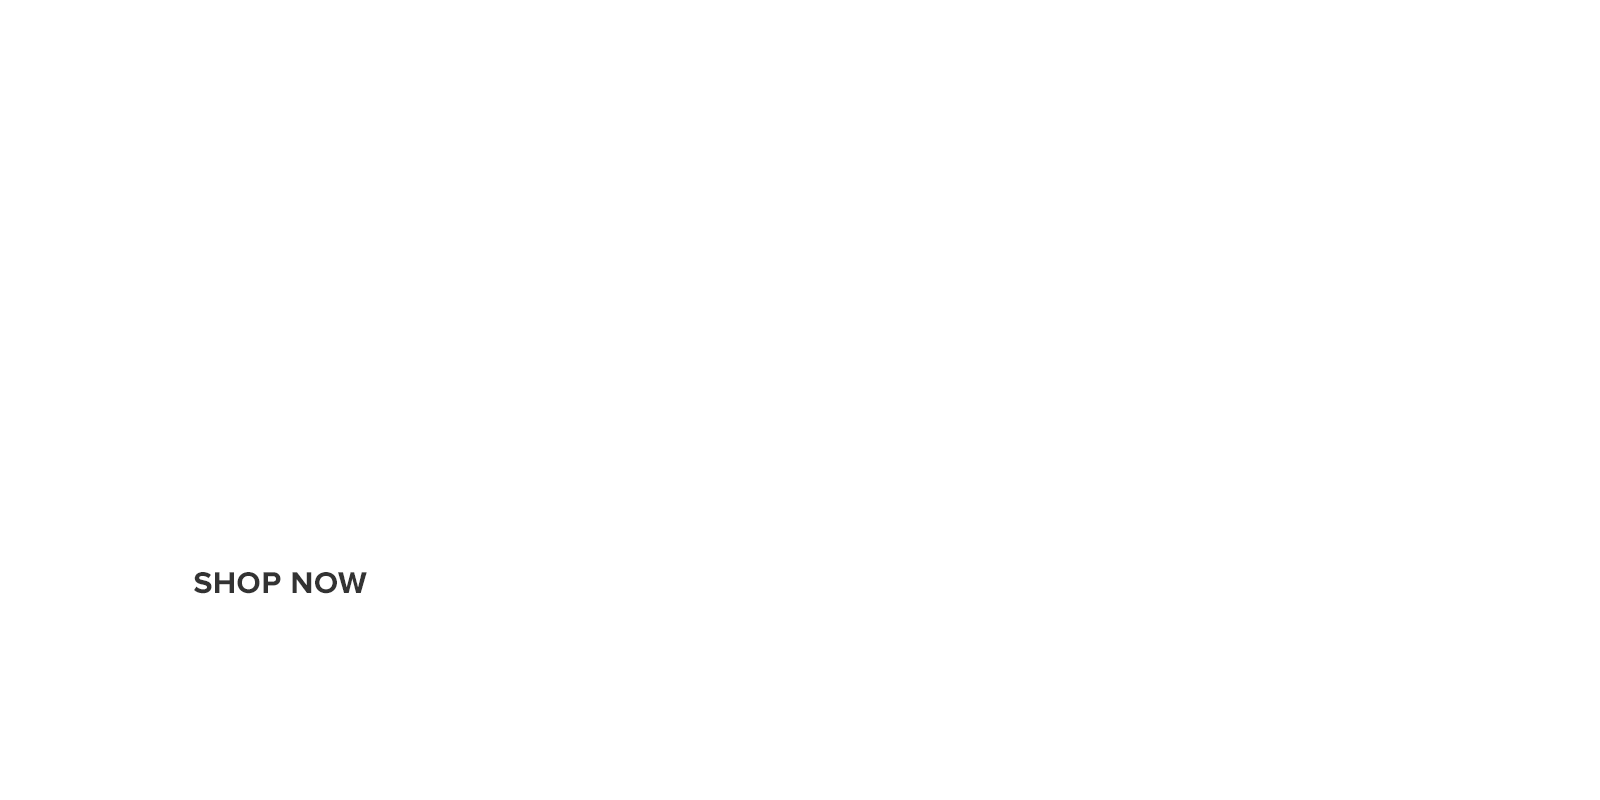 25% off fitness with code dotdfitness